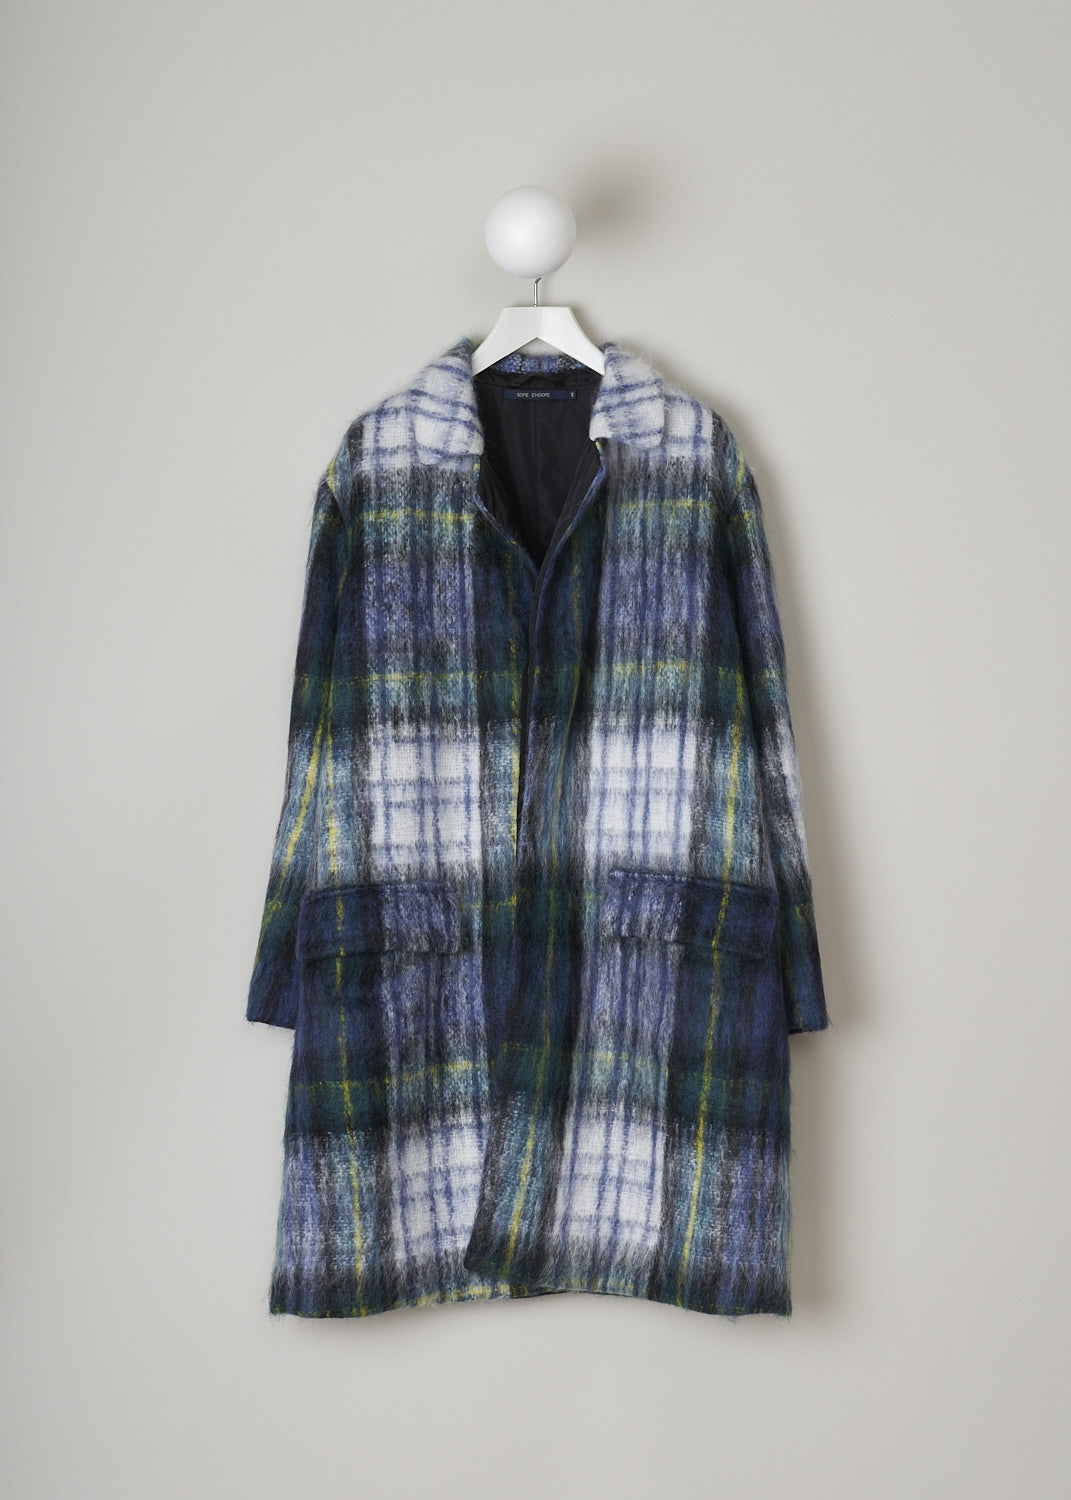 SOFIE Dâ€™HOORE, GREEN TARTAN CHERYL COAT, CHERYL_WOMO_GREEN_TARTAN, Green, Blue, Print, Front, This green tartan mohair-blend  Cheryl coat is single-breasted with a spread collar and a concealed front button closure. In the front, the coat has two flap welt pockets. A centre vent can be found in the back. The coat has an oversized fit and is fully lined. 